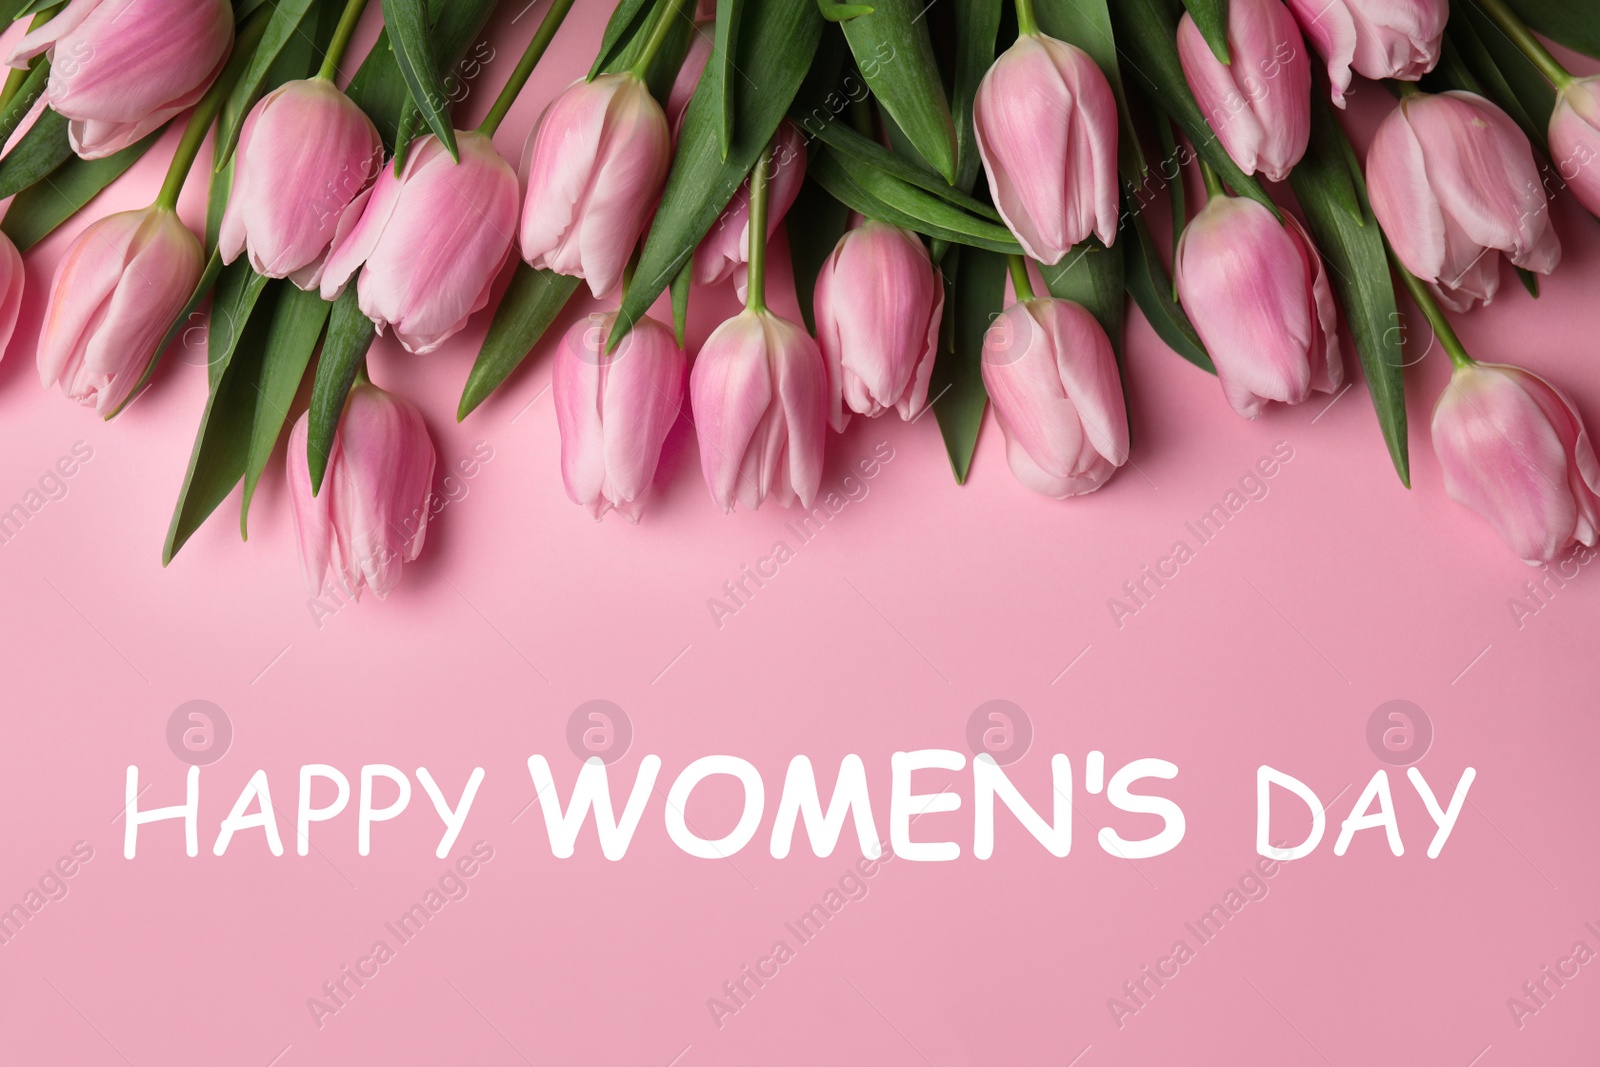 Image of Beautiful spring tulips on light pink background, flat lay. Happy Women's Day